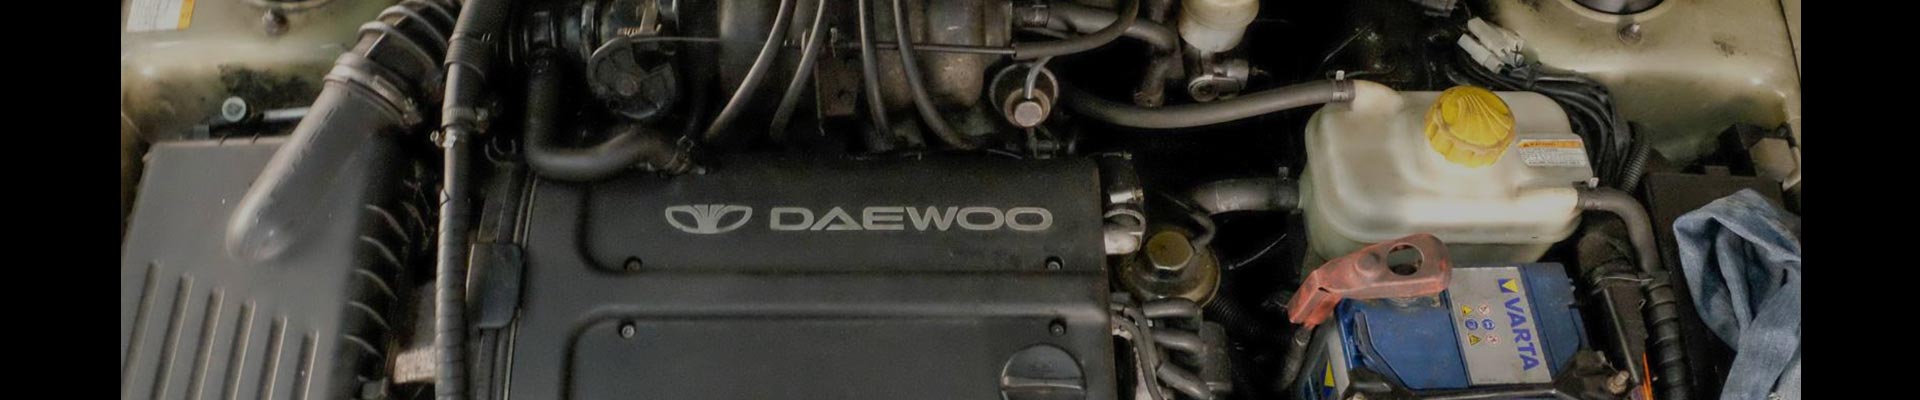 Shop Replacement Daewoo Lanos Parts with Discounted Price on the Net